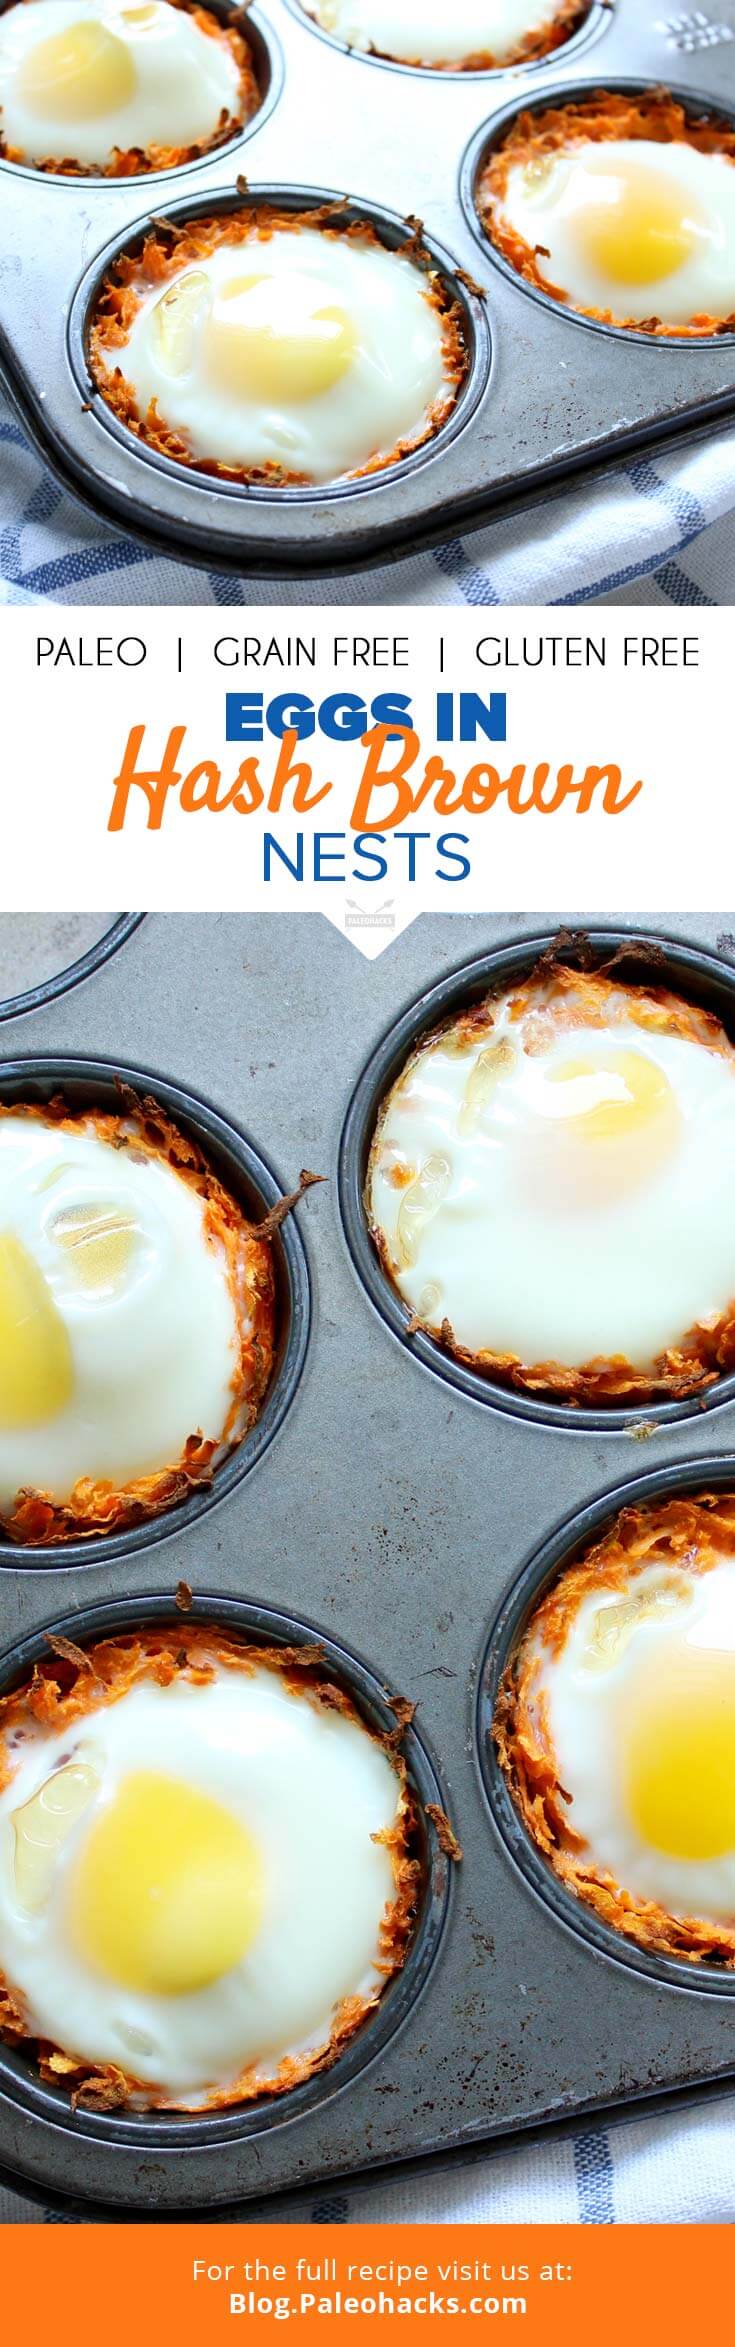 eggs in hash brown nests pin